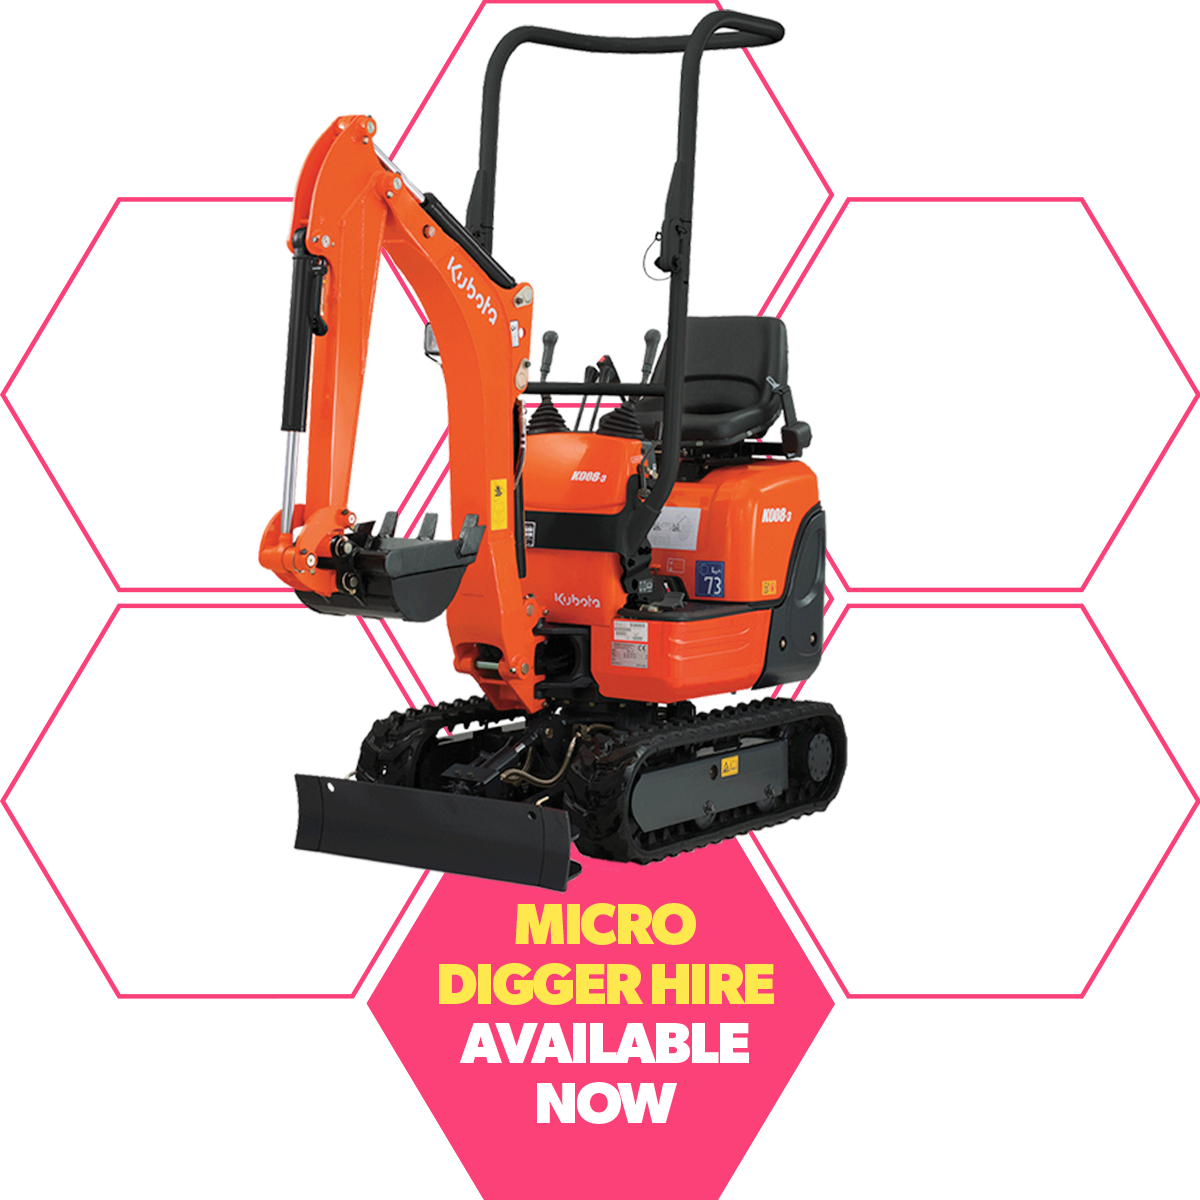 Micro Digger Hire Available Now